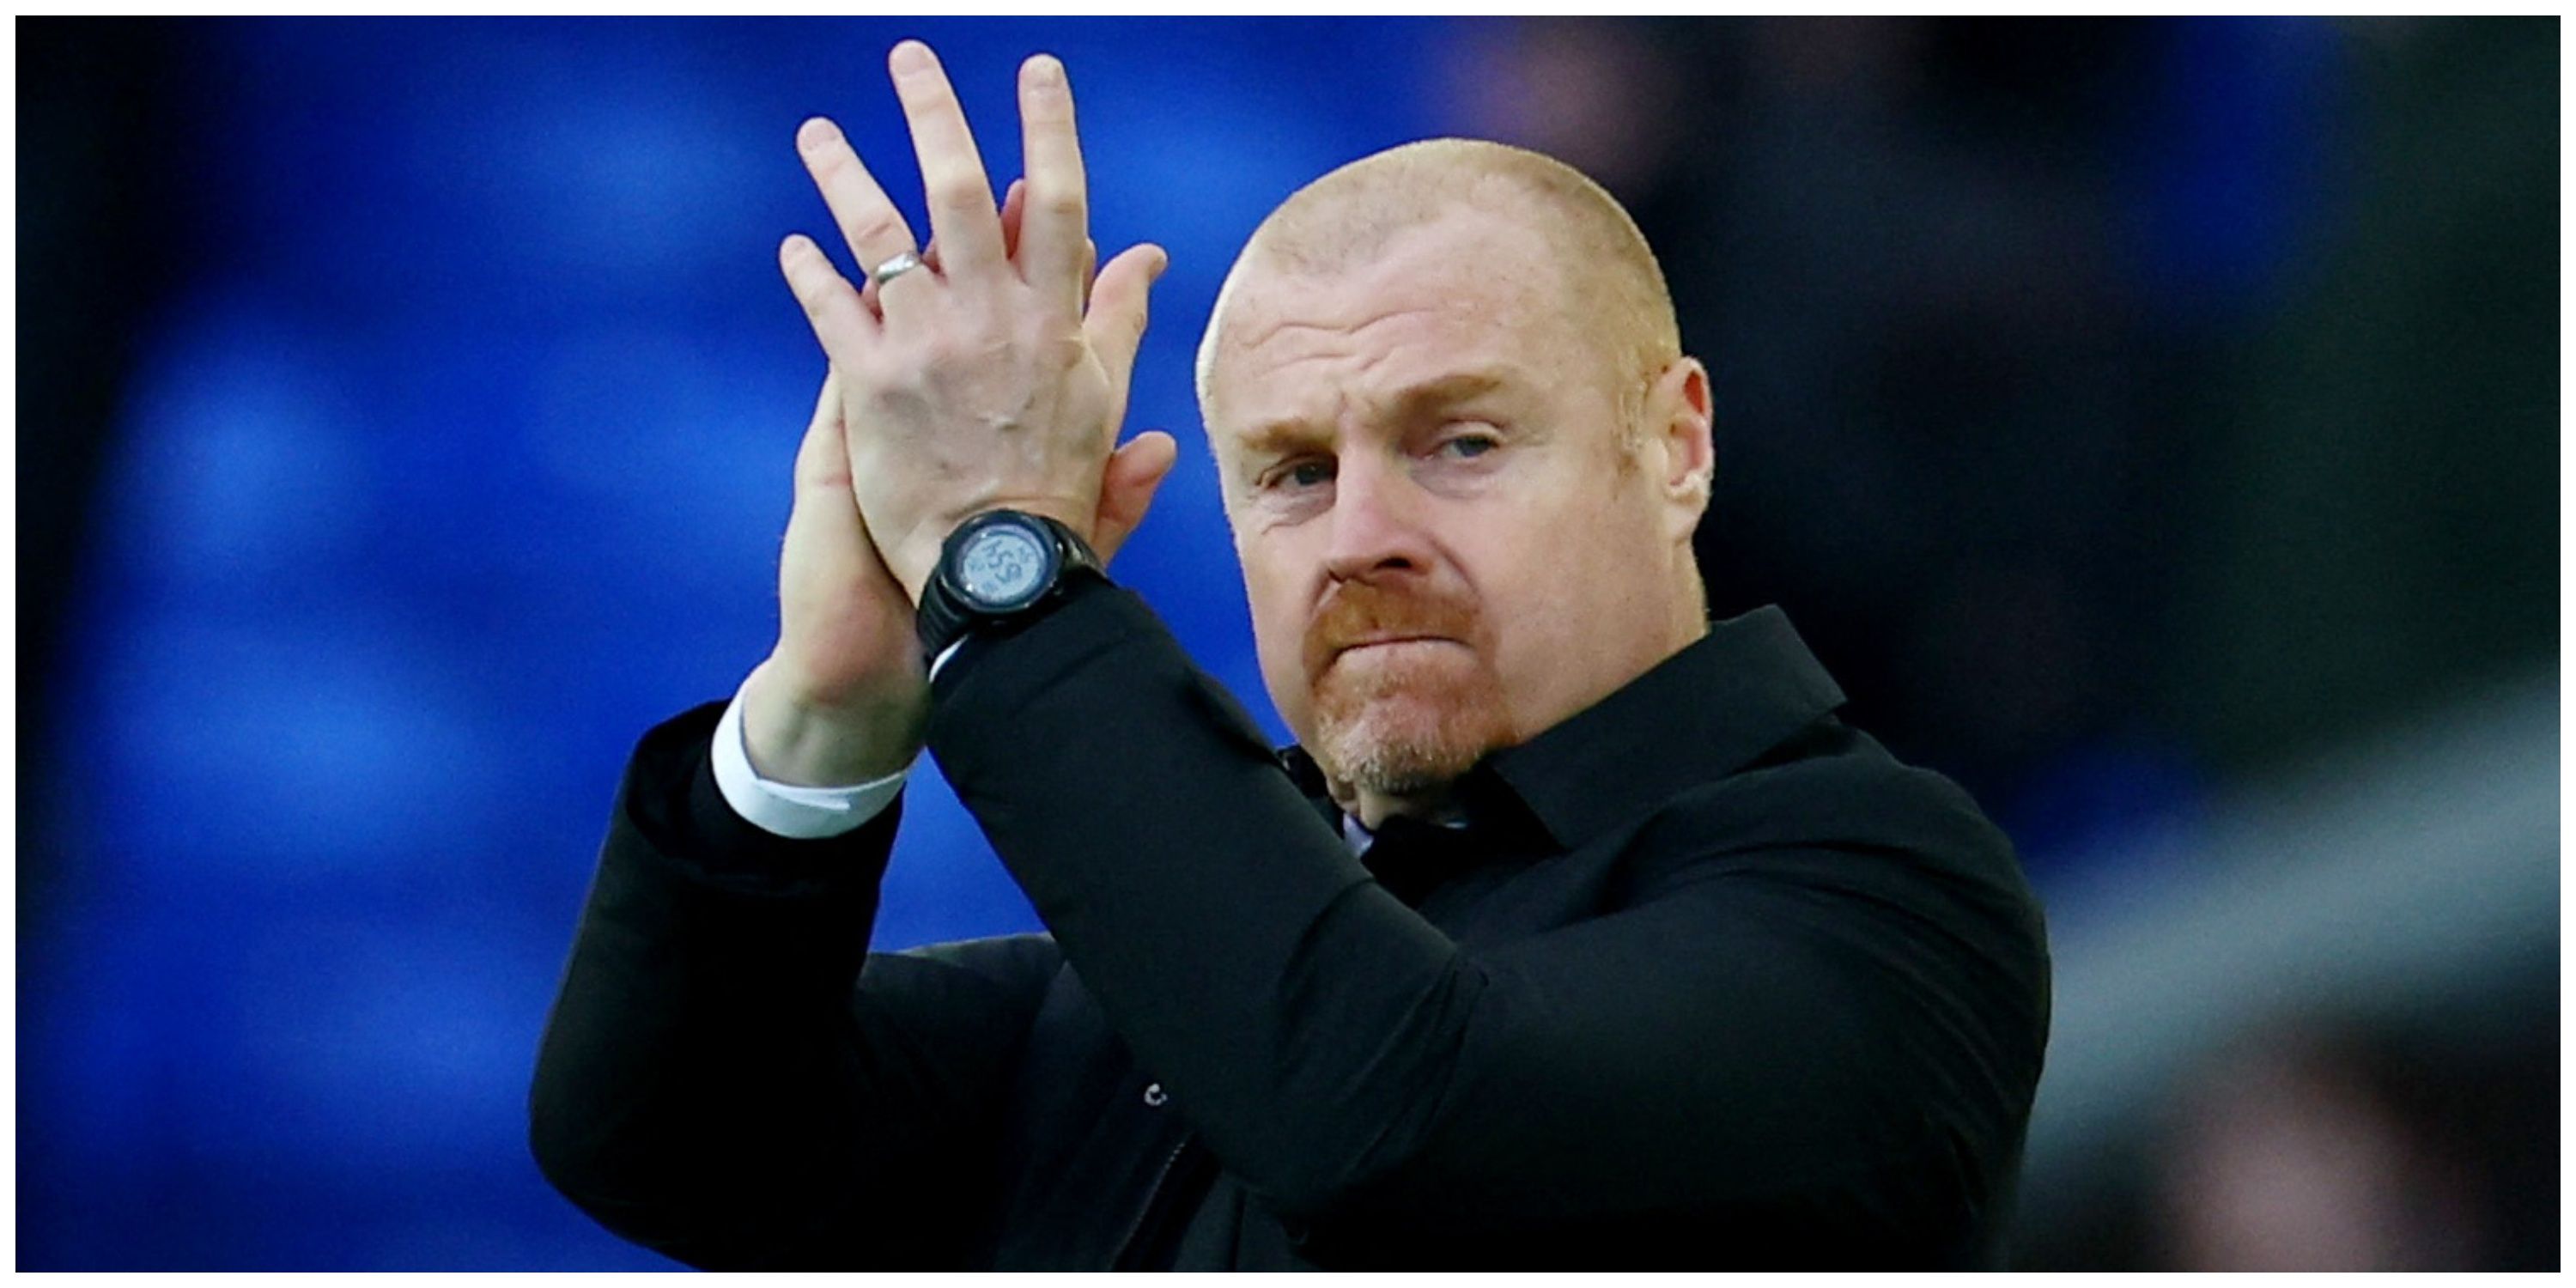 Everton manager Sean Dyche clapping